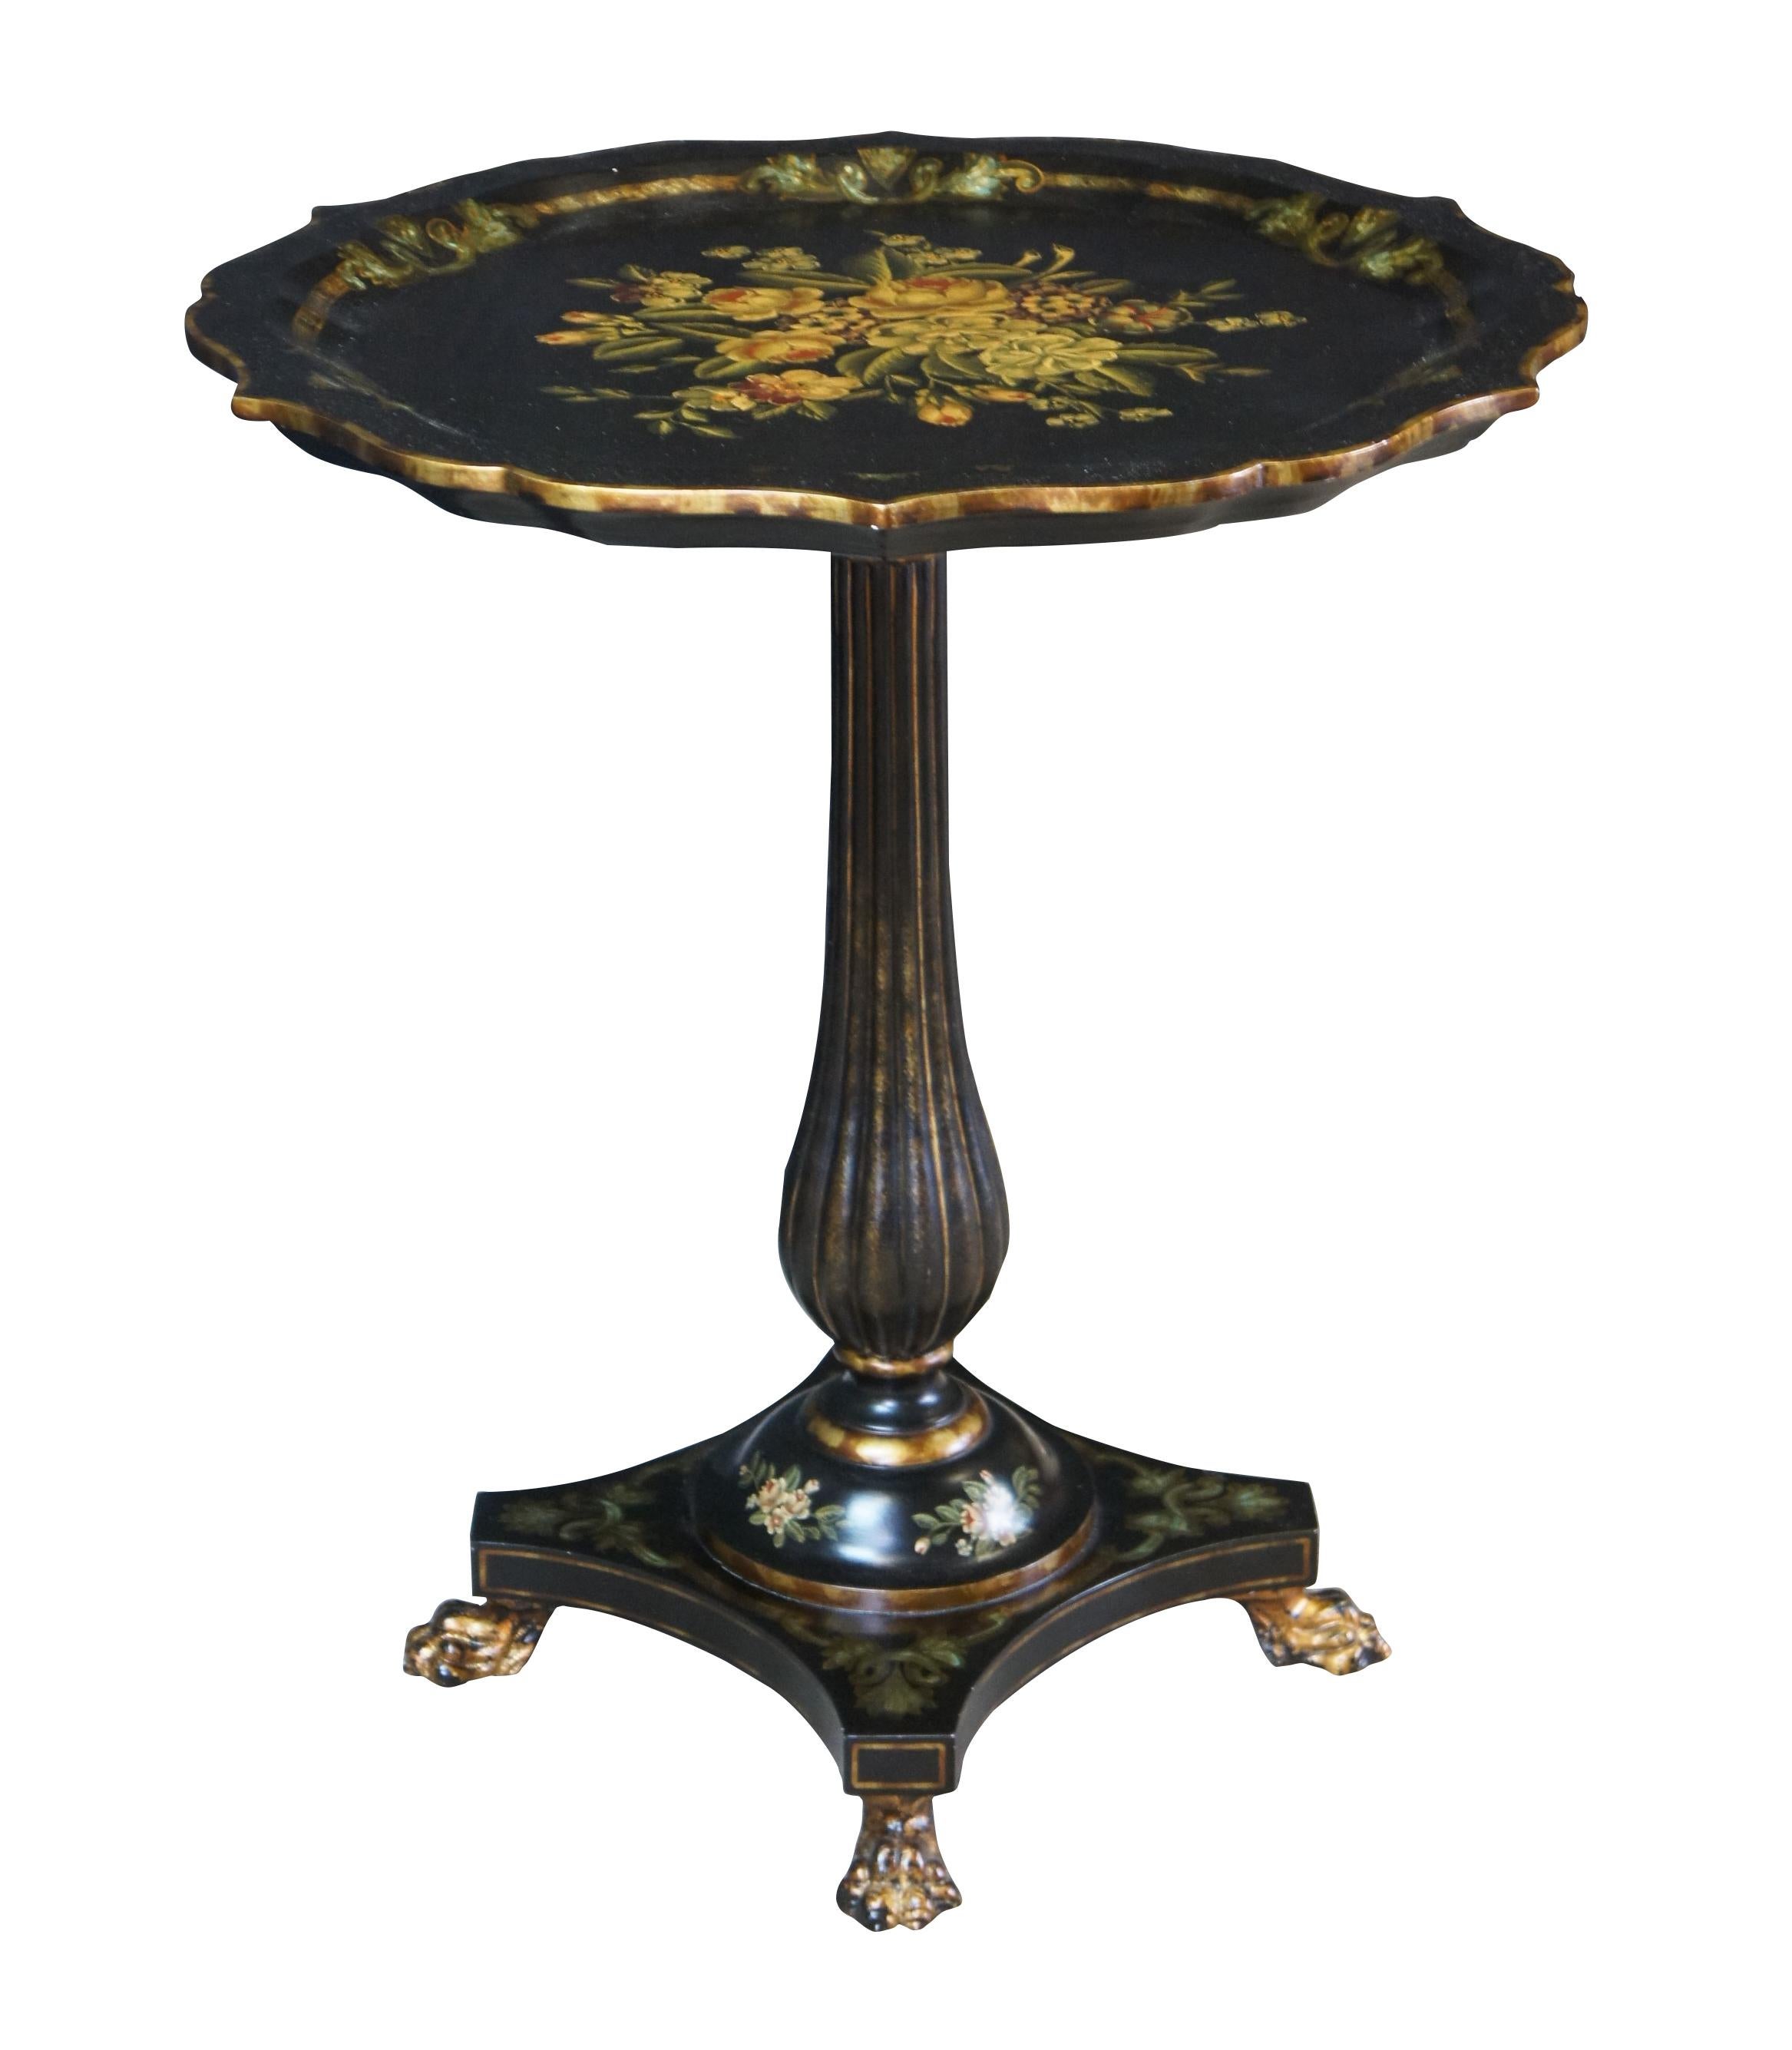 Maitland Smith ebonized pedestal table, circa last quarter 20th century.  Drawing inspiration from Victorian and French Empire styling. Features a scalloped and floral painted top over a reeded baluster leading to an iron claw foot